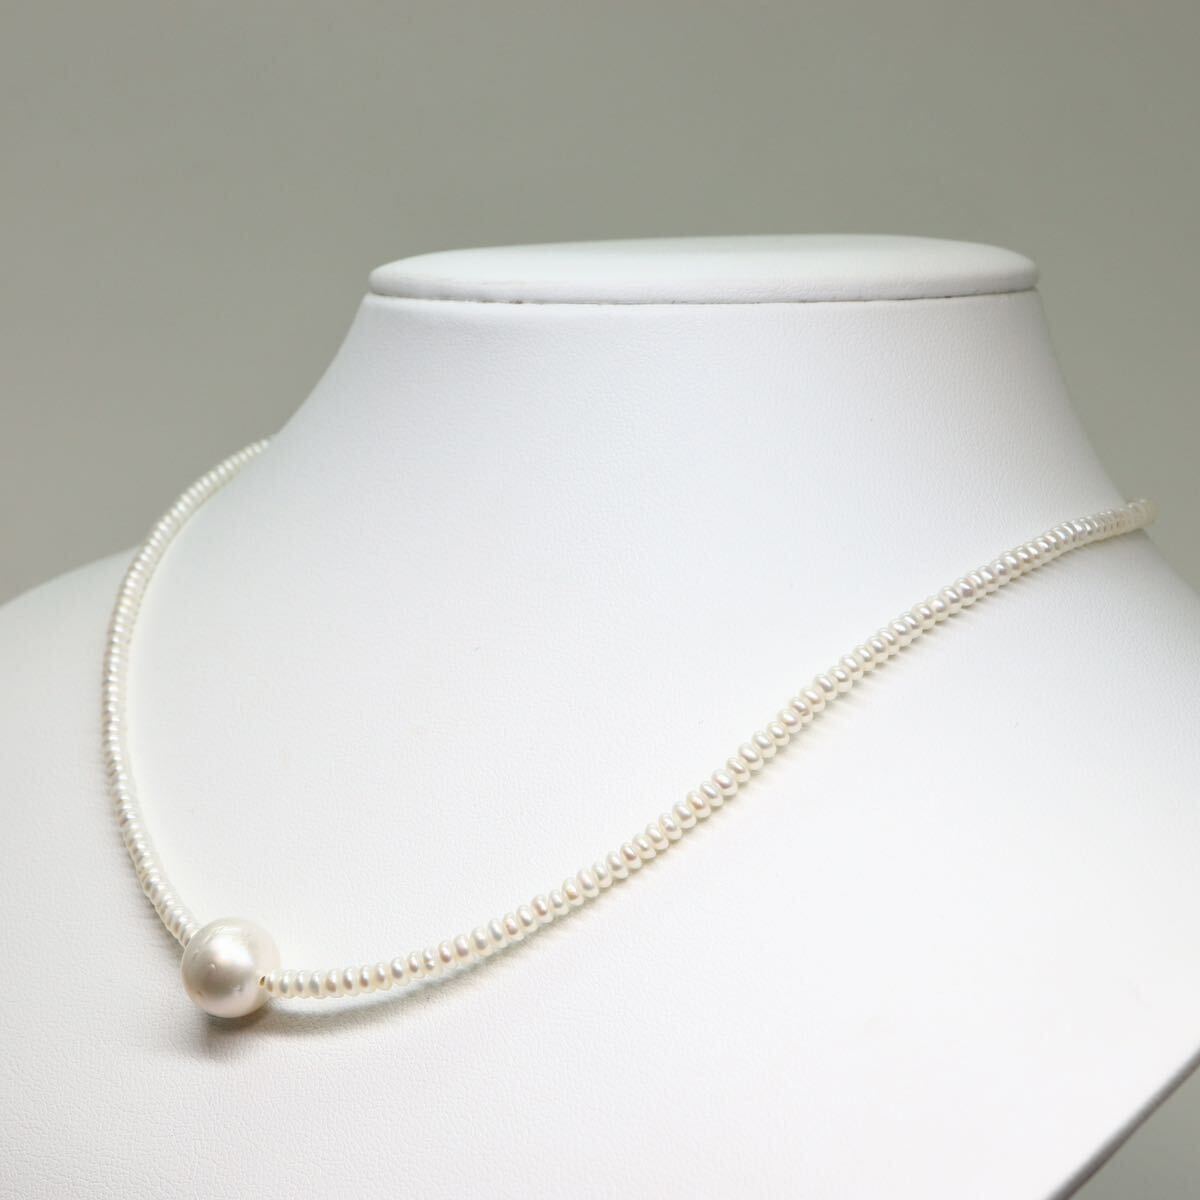 《K18 本真珠ネックレス》M 7.5g 約43cm pearl necklace ジュエリー jewelry DC0/DD0_画像4